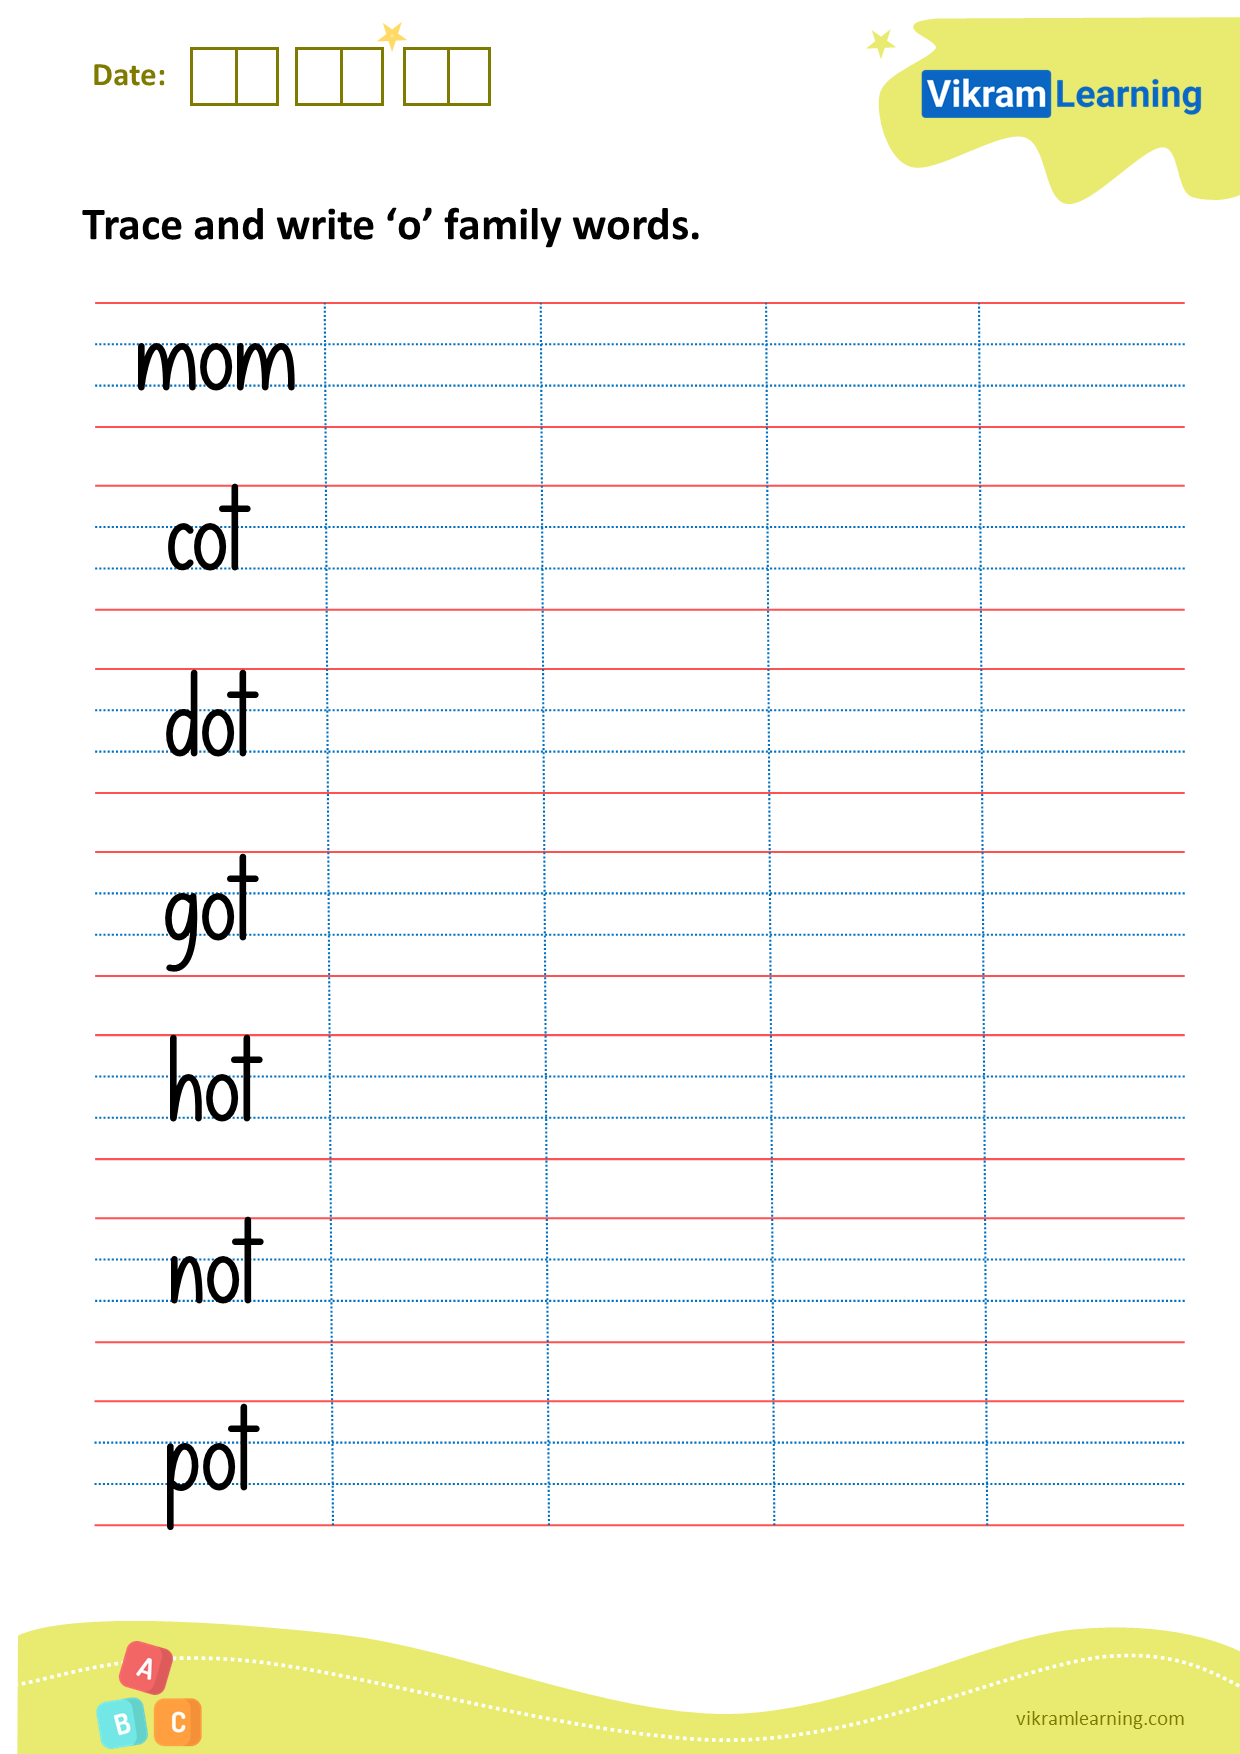 Download trace and write ‘o’ family words worksheets